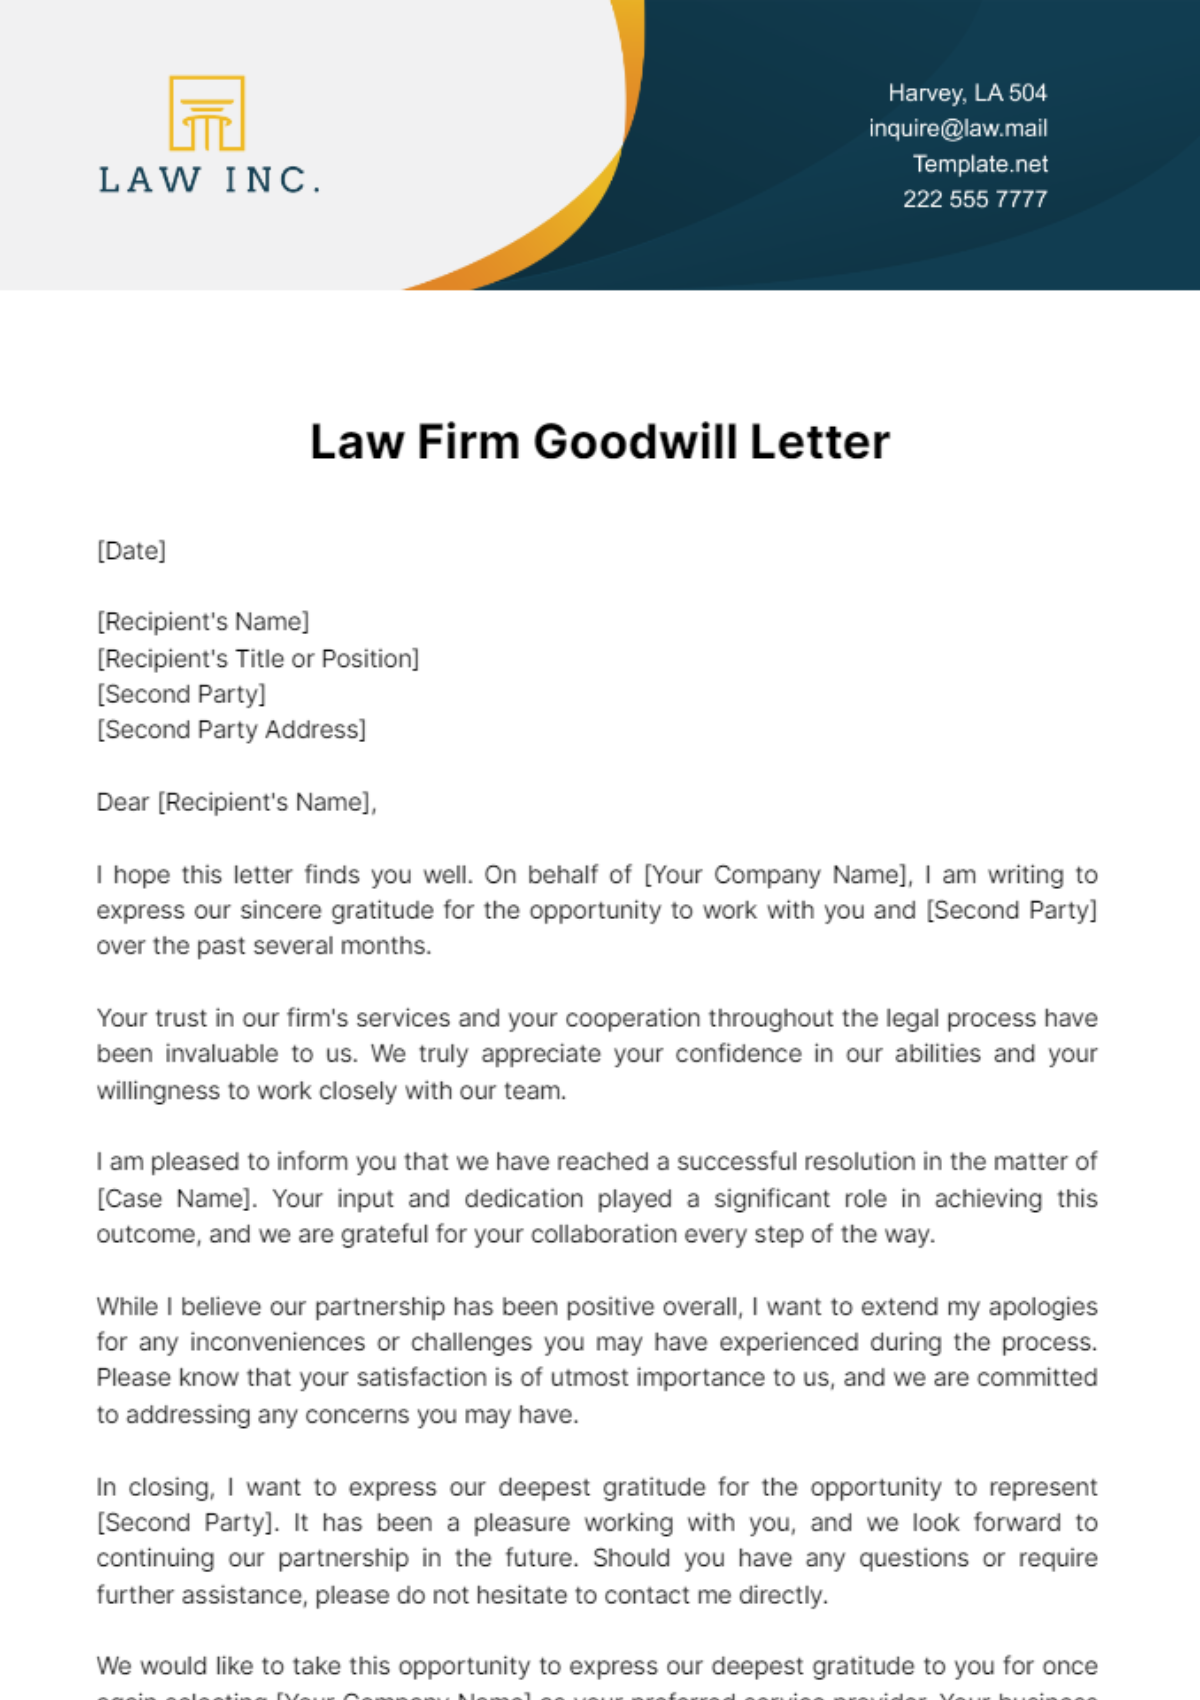 Law Firm Goodwill Letter Template